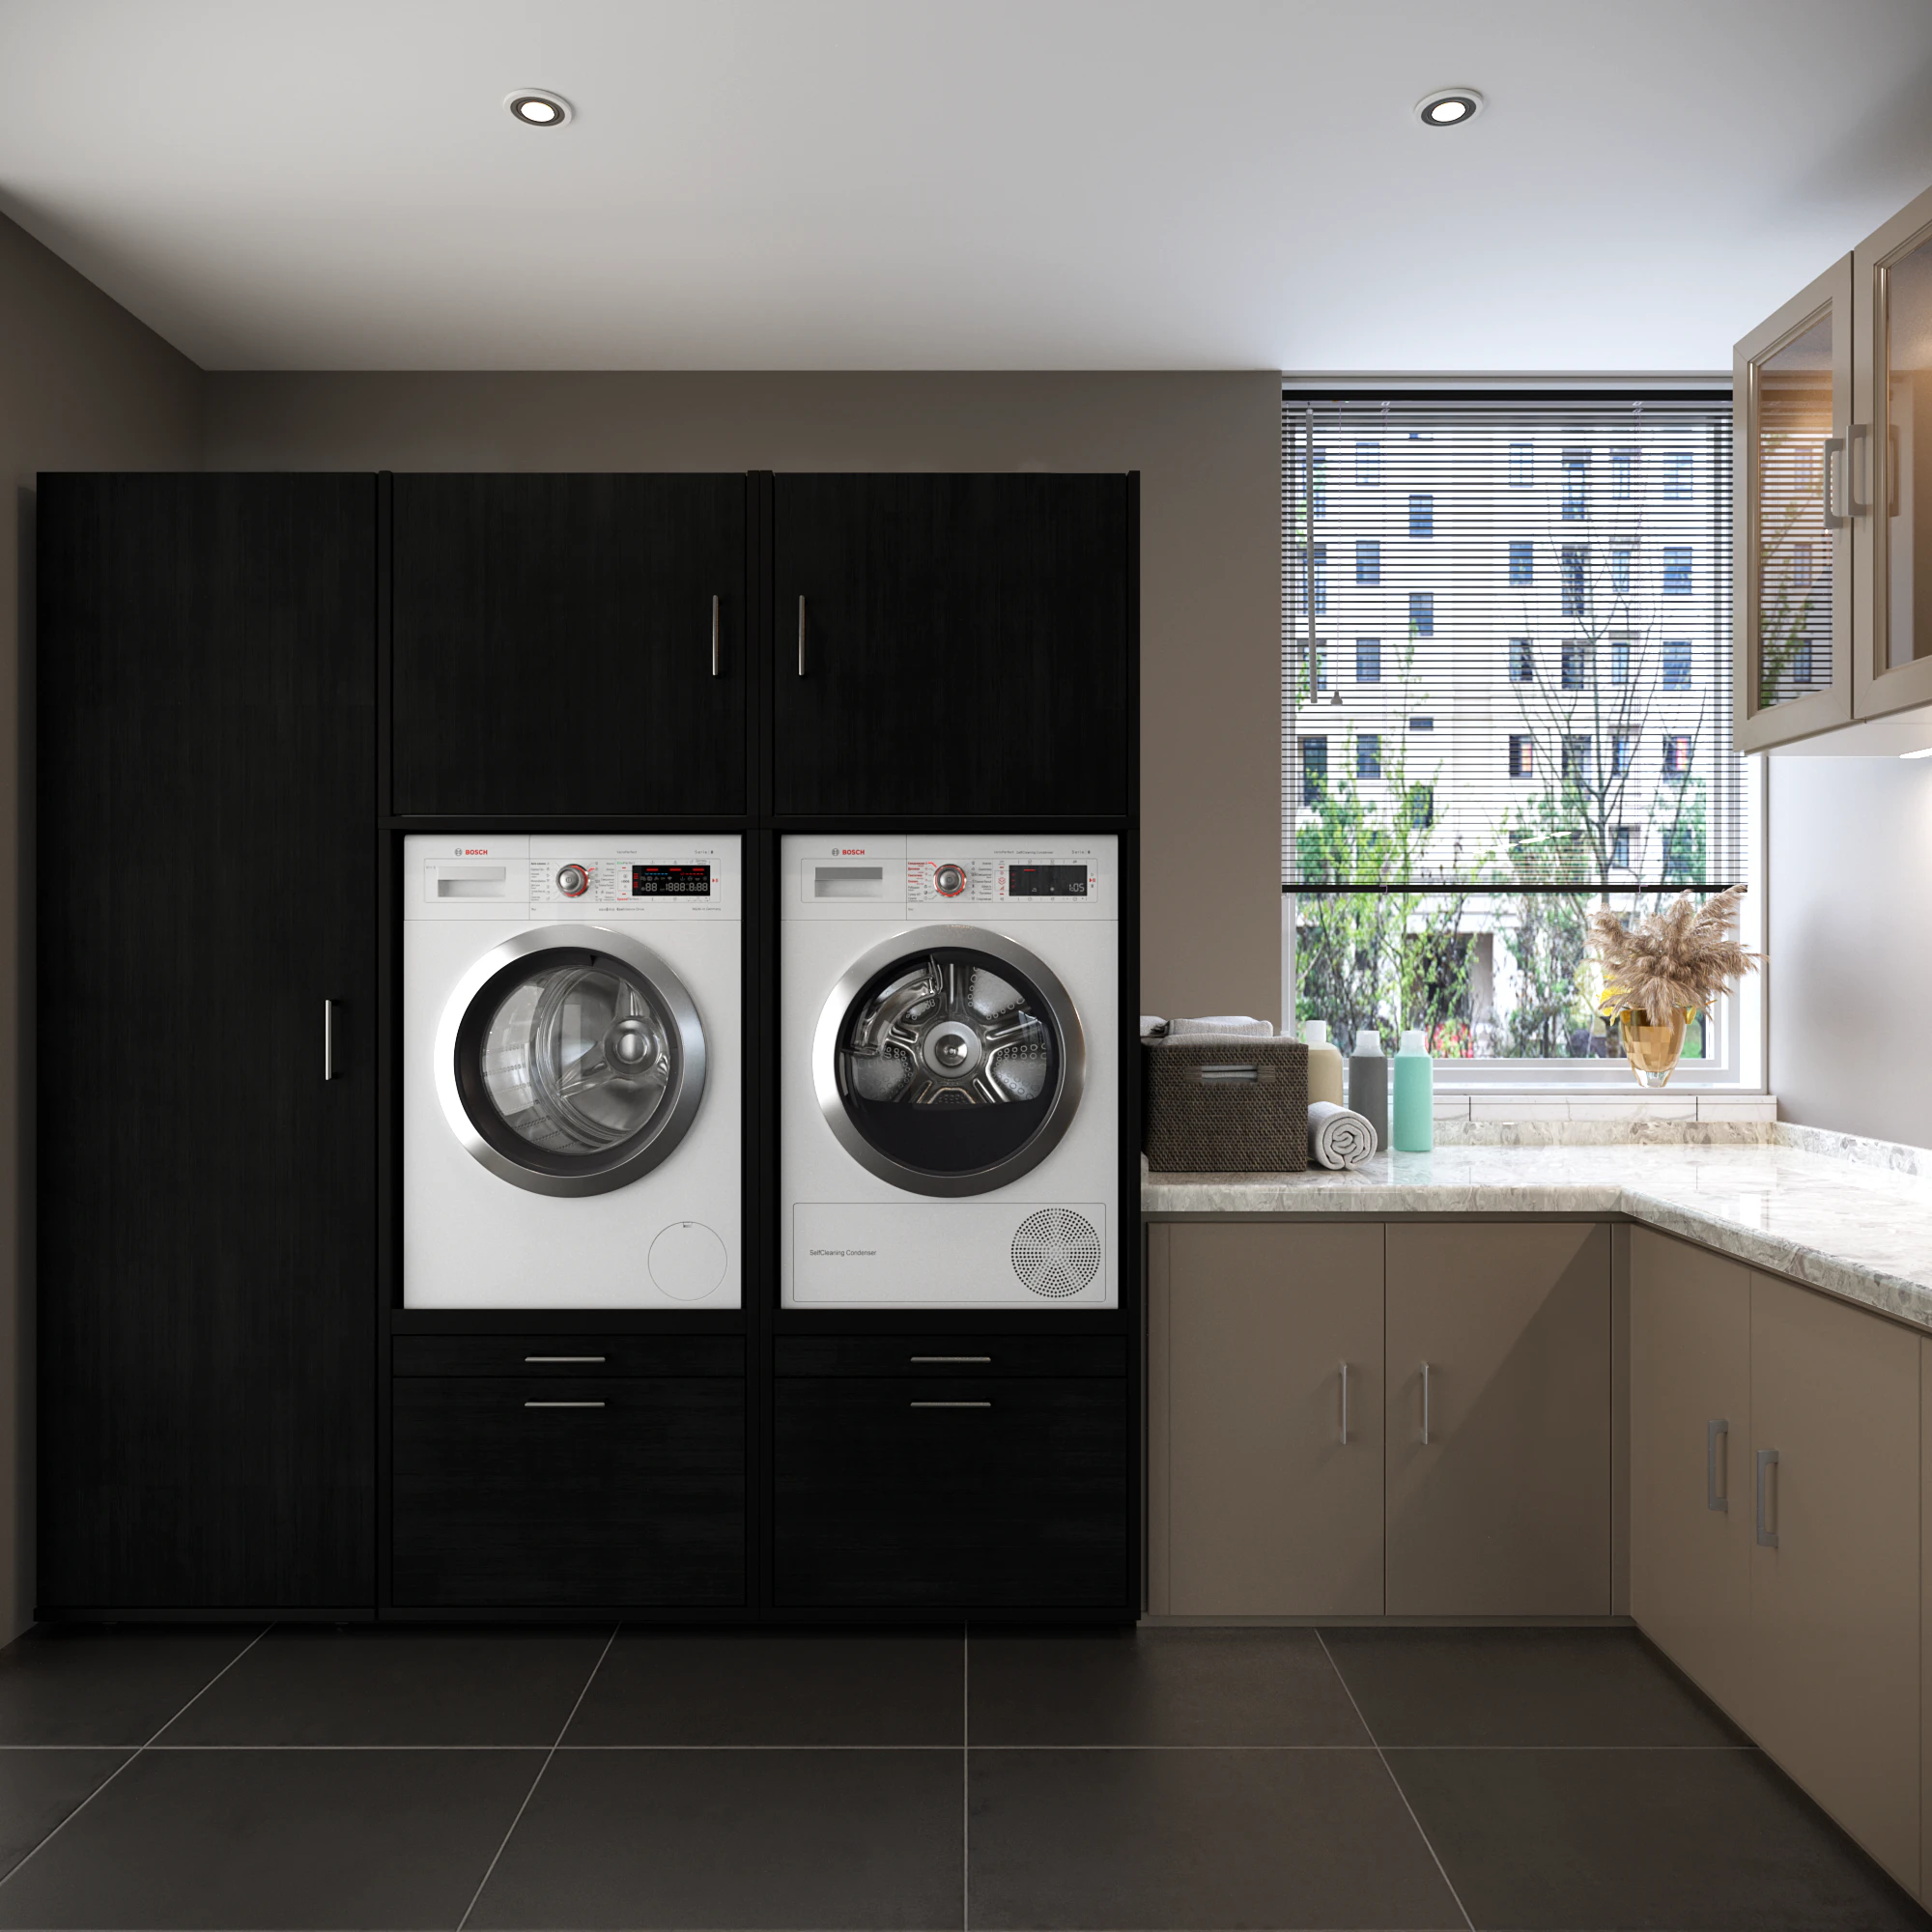 Lifestyle shot of black washing machine and dryer cupboard wall in situ in utility room